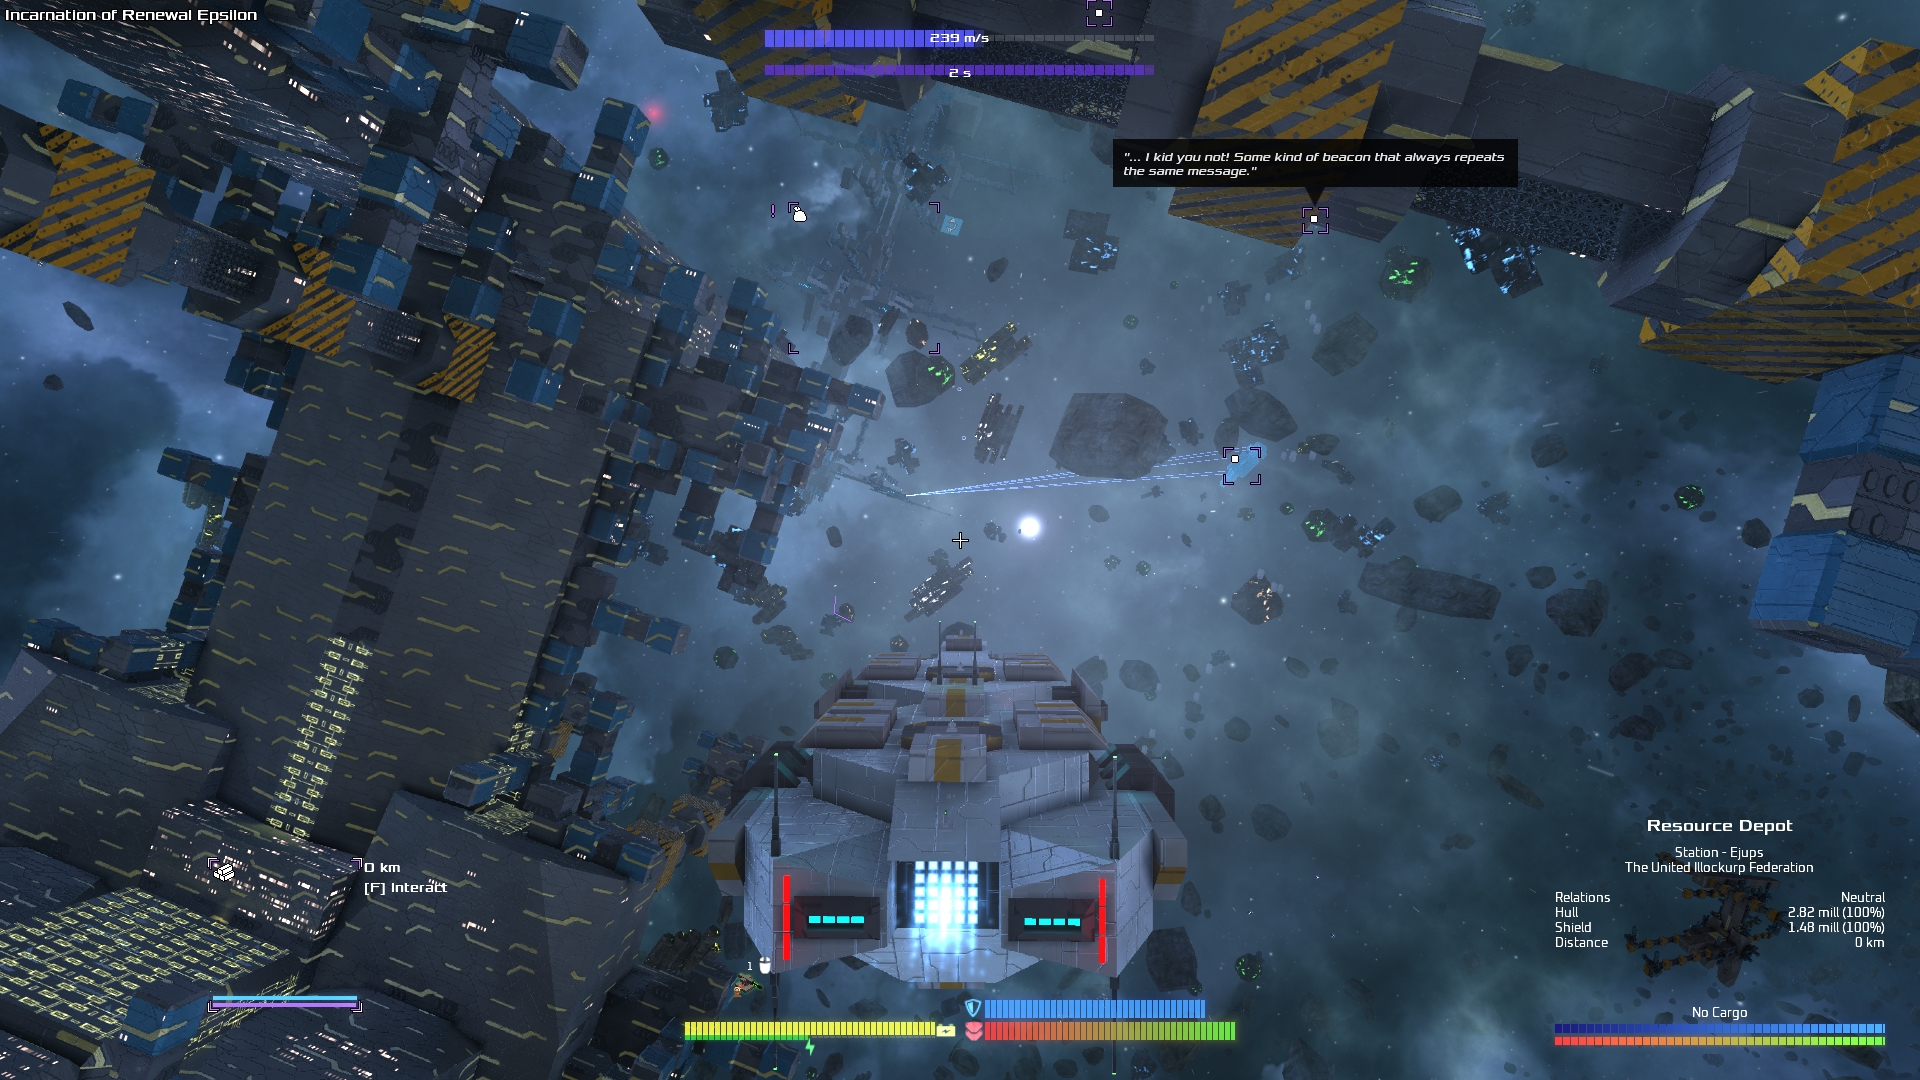 A space ship in looking into a bright, sunny sector with a shipyard, asteroids and some ships